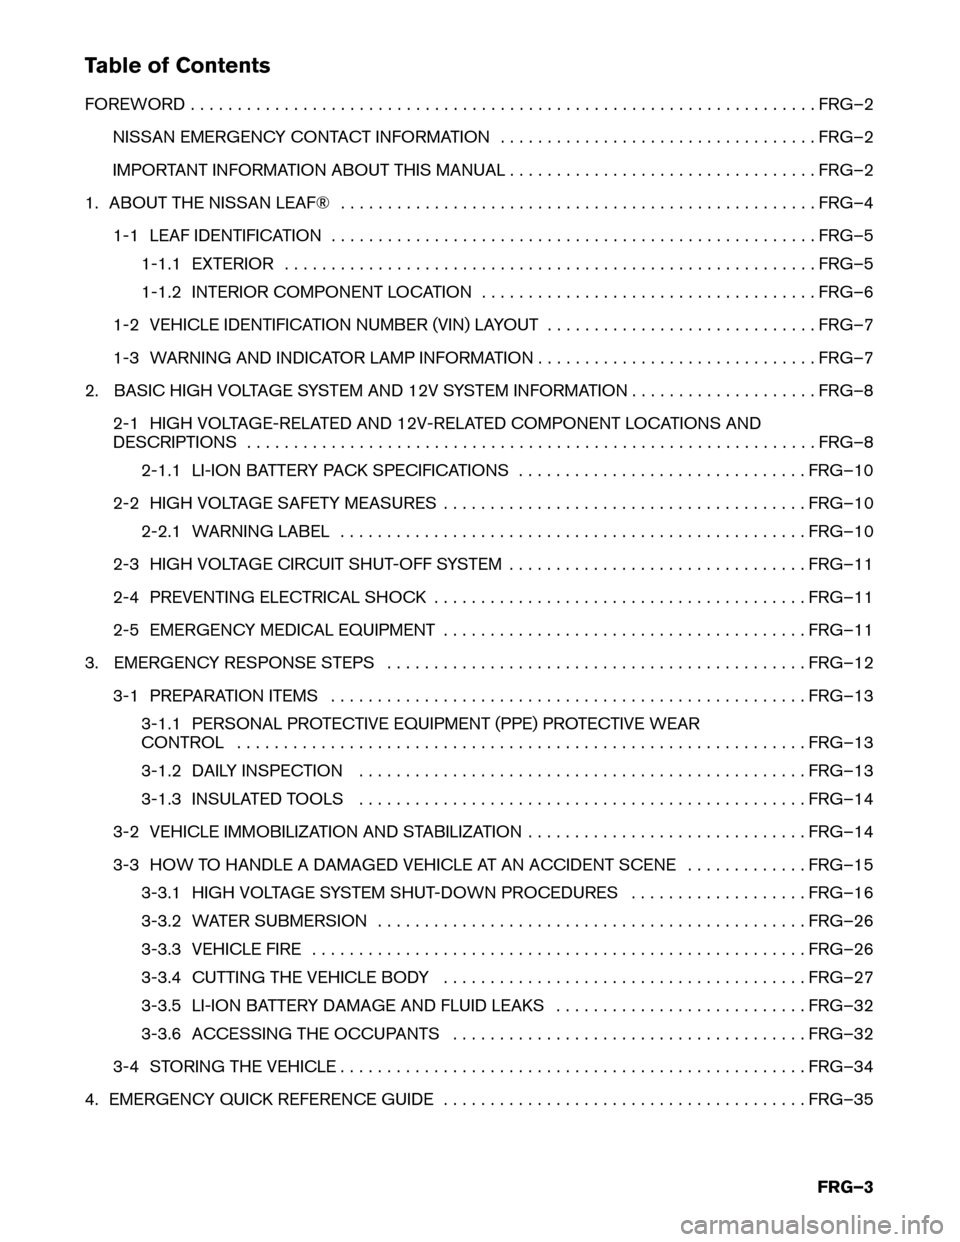 NISSAN LEAF 2015 1.G First Responders Guide Table of Contents
FOREWORD
. . . . . . . . . . . . . . . . . . . . . . . . . . . . . . . . . . . . . . . . . . . . . . . . . . . . . . . . . . . . . . . . . . . FRG–2
NISSAN EMERGENCY CONTACT INFORM